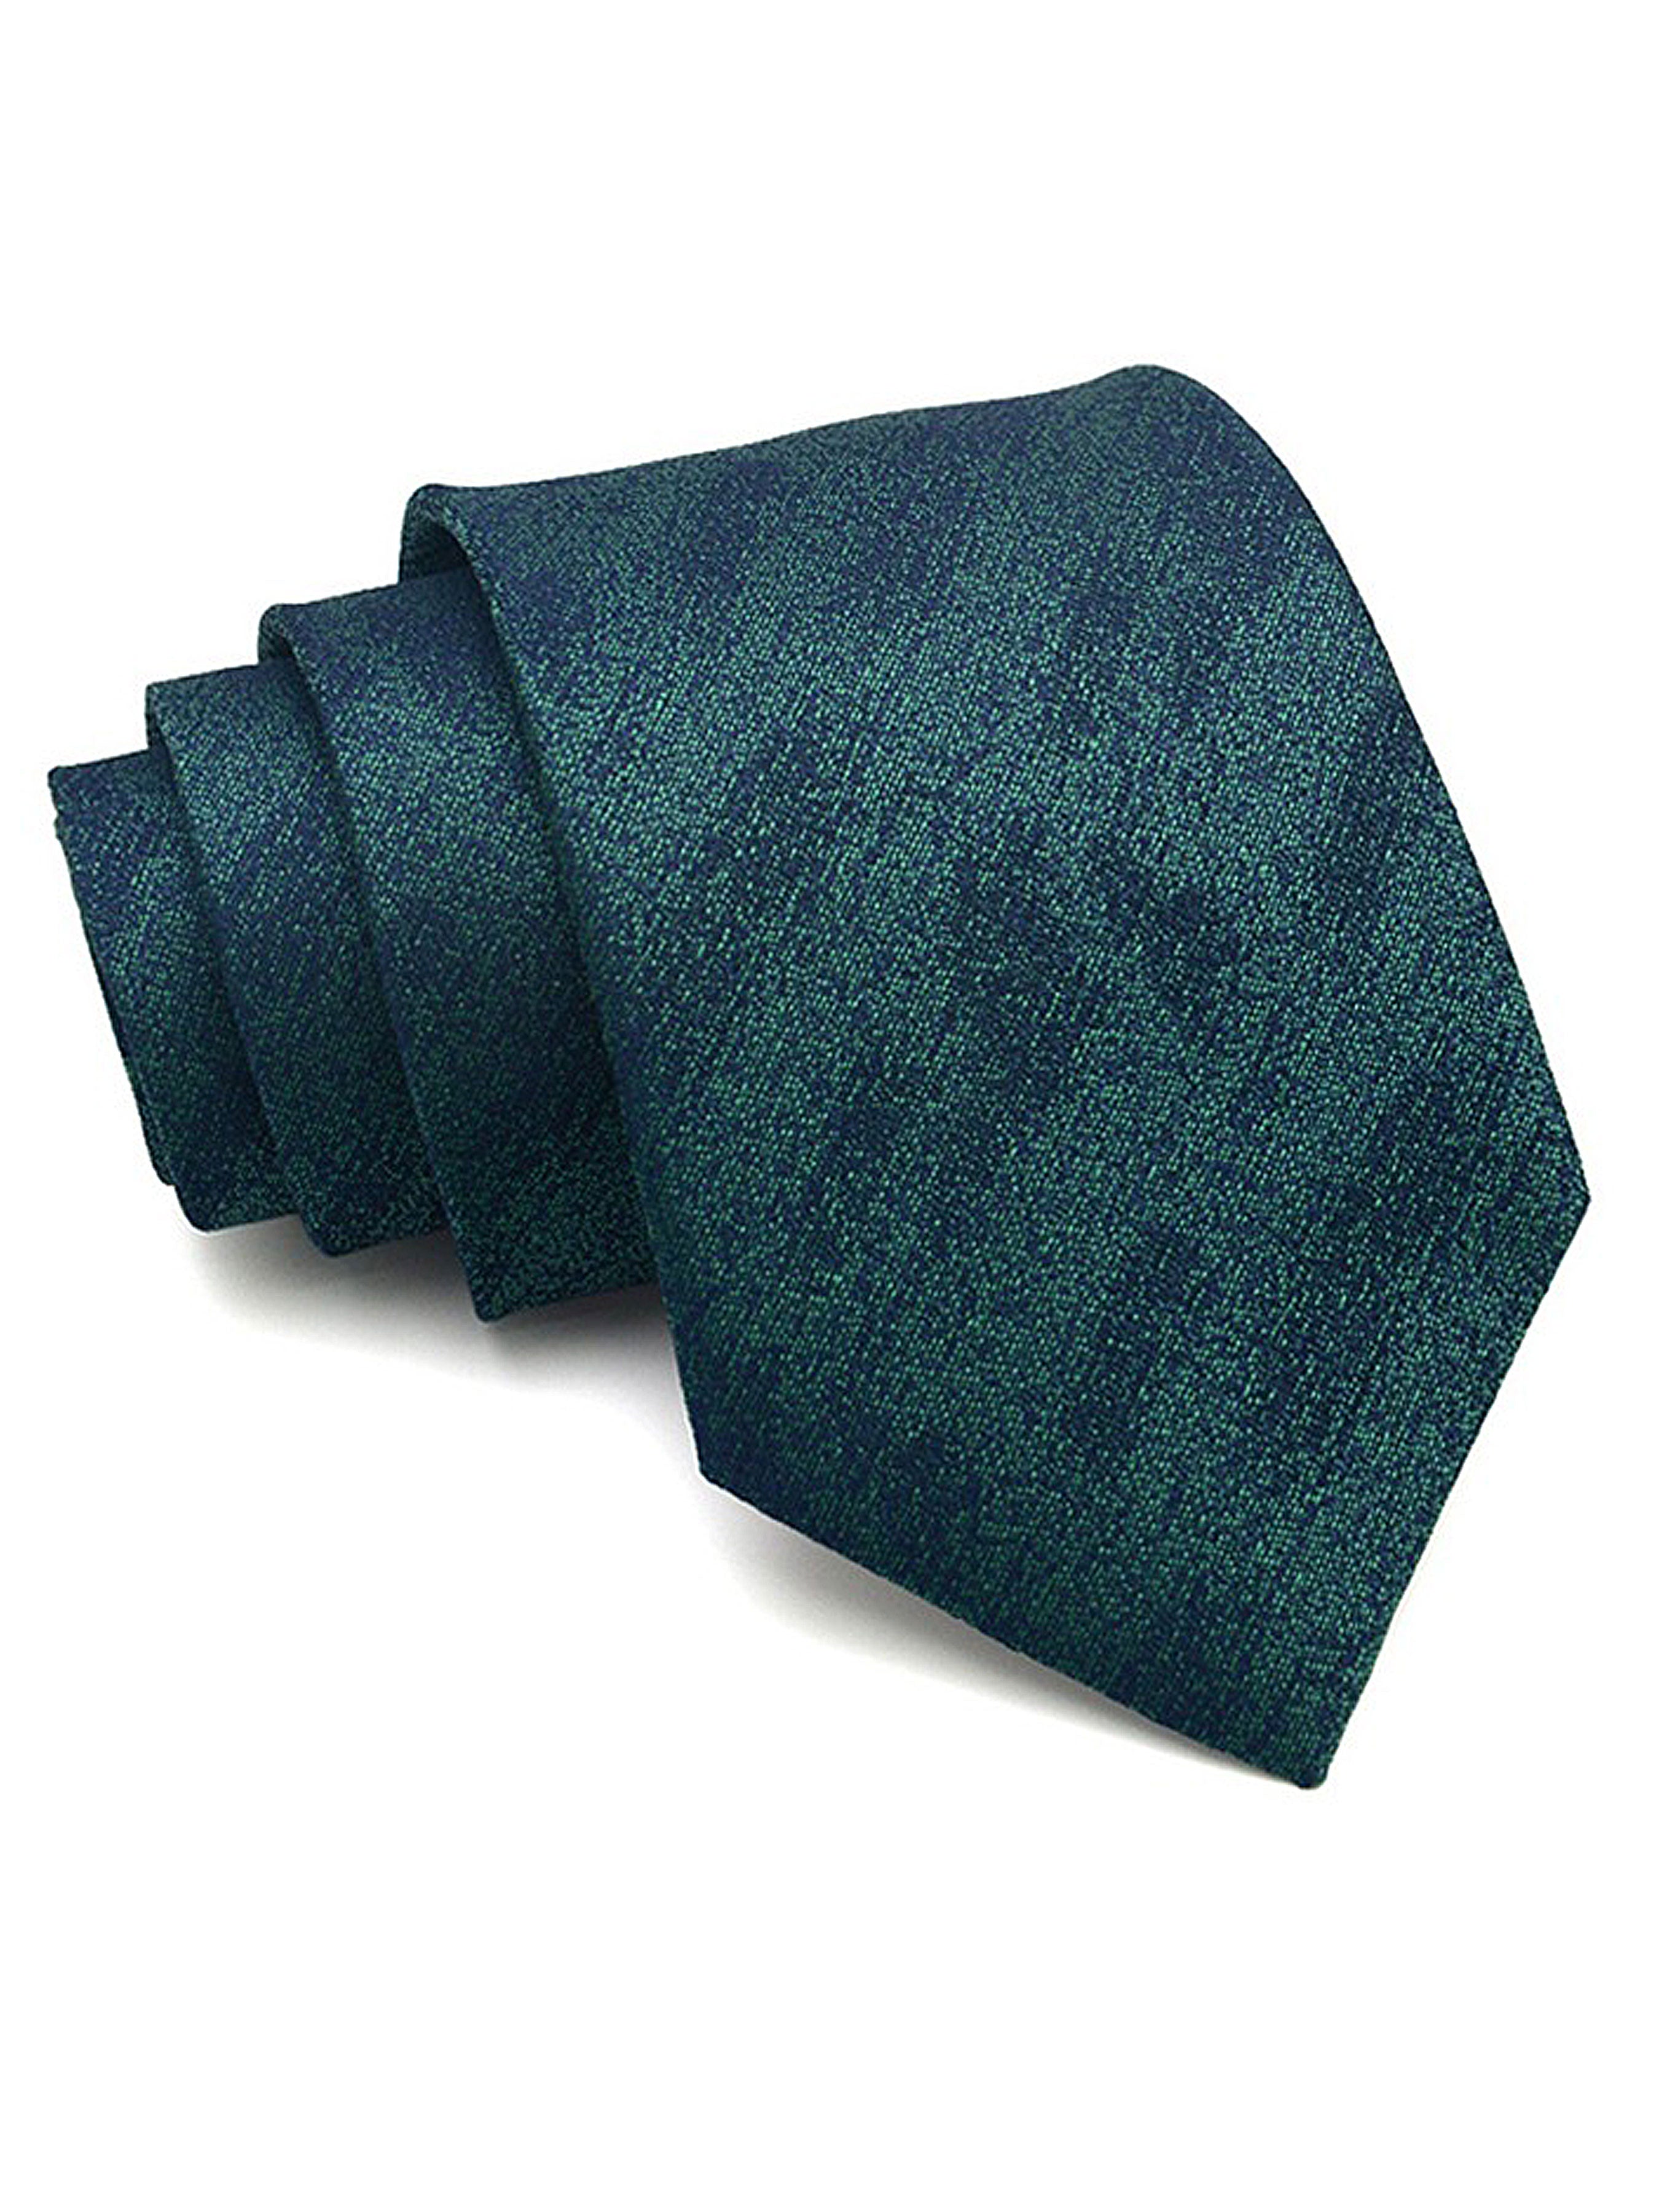 Brushed Abstract Tie - Emerald Green - Zeve Shoes